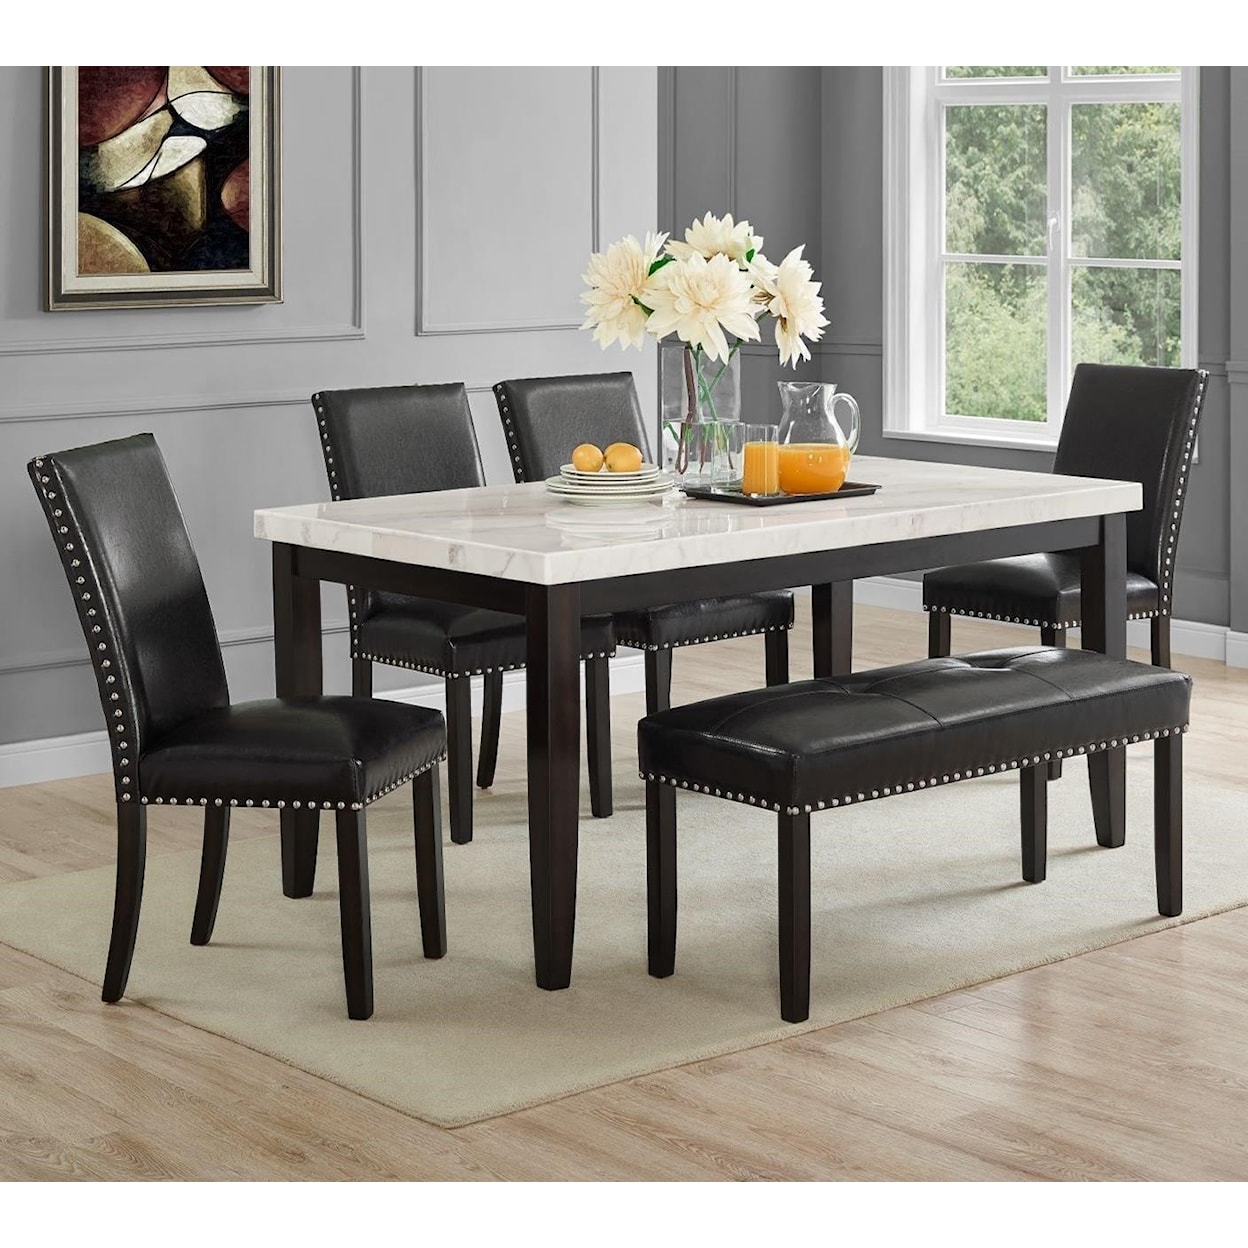 Prime Westby Table and Chair Set with Bench